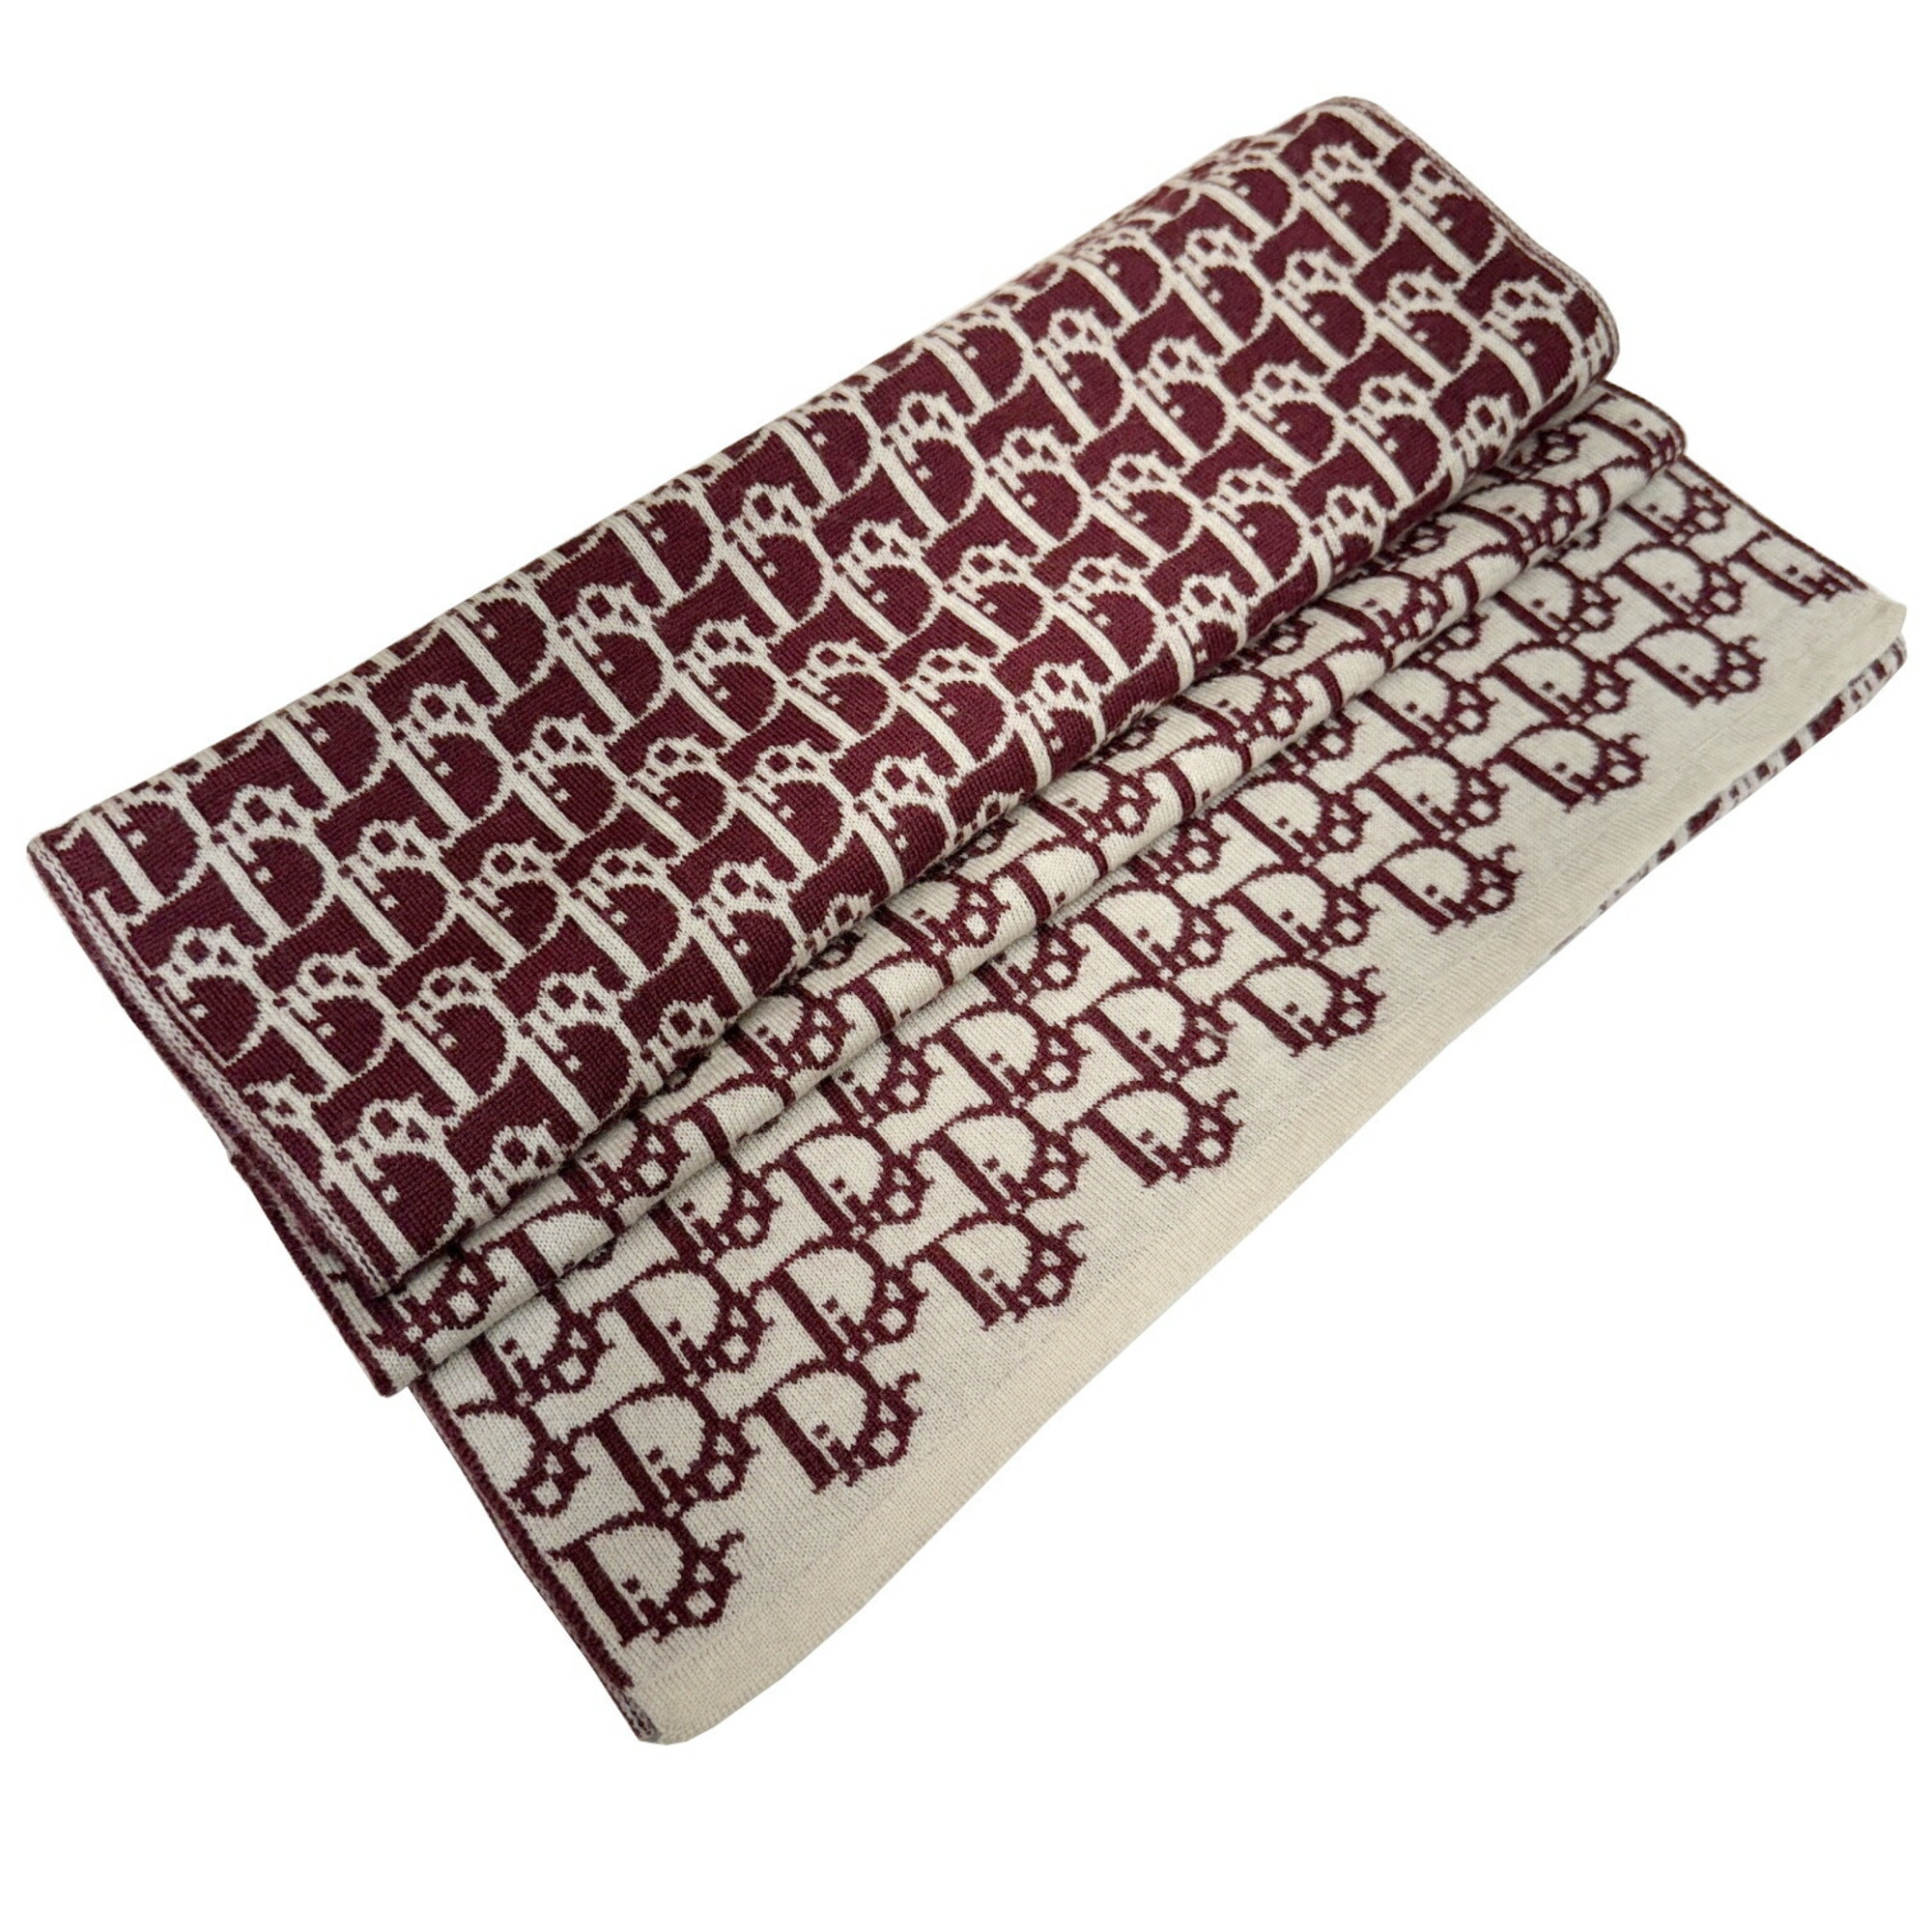 CHRISITIAN DIOR Christian Dior Muffler Trotter Pattern Wine Red Bordeaux Ivory Reversible 100% Wool Jacquard Ladies